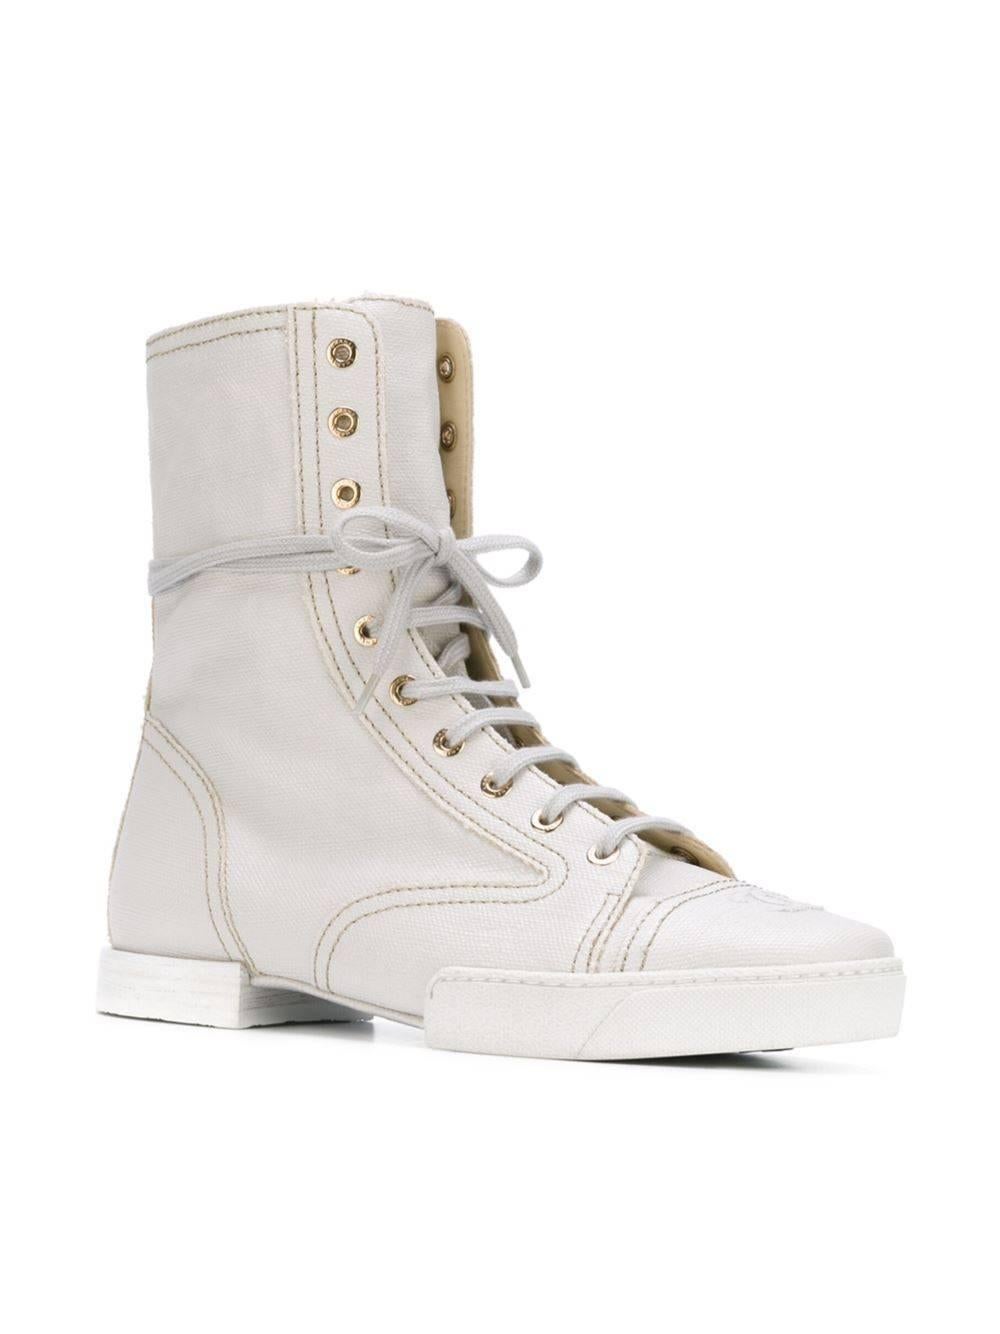 White canvas lace-up ankle boots featuring a round toe, a front embossed logo stamp, a lace-up front fastening and a flat rubber sole.

Colour: White

Material: Canvas 100% / Rubber 100%

Measurements: H: 19cm, Heel: 1.6cm

Size: FR